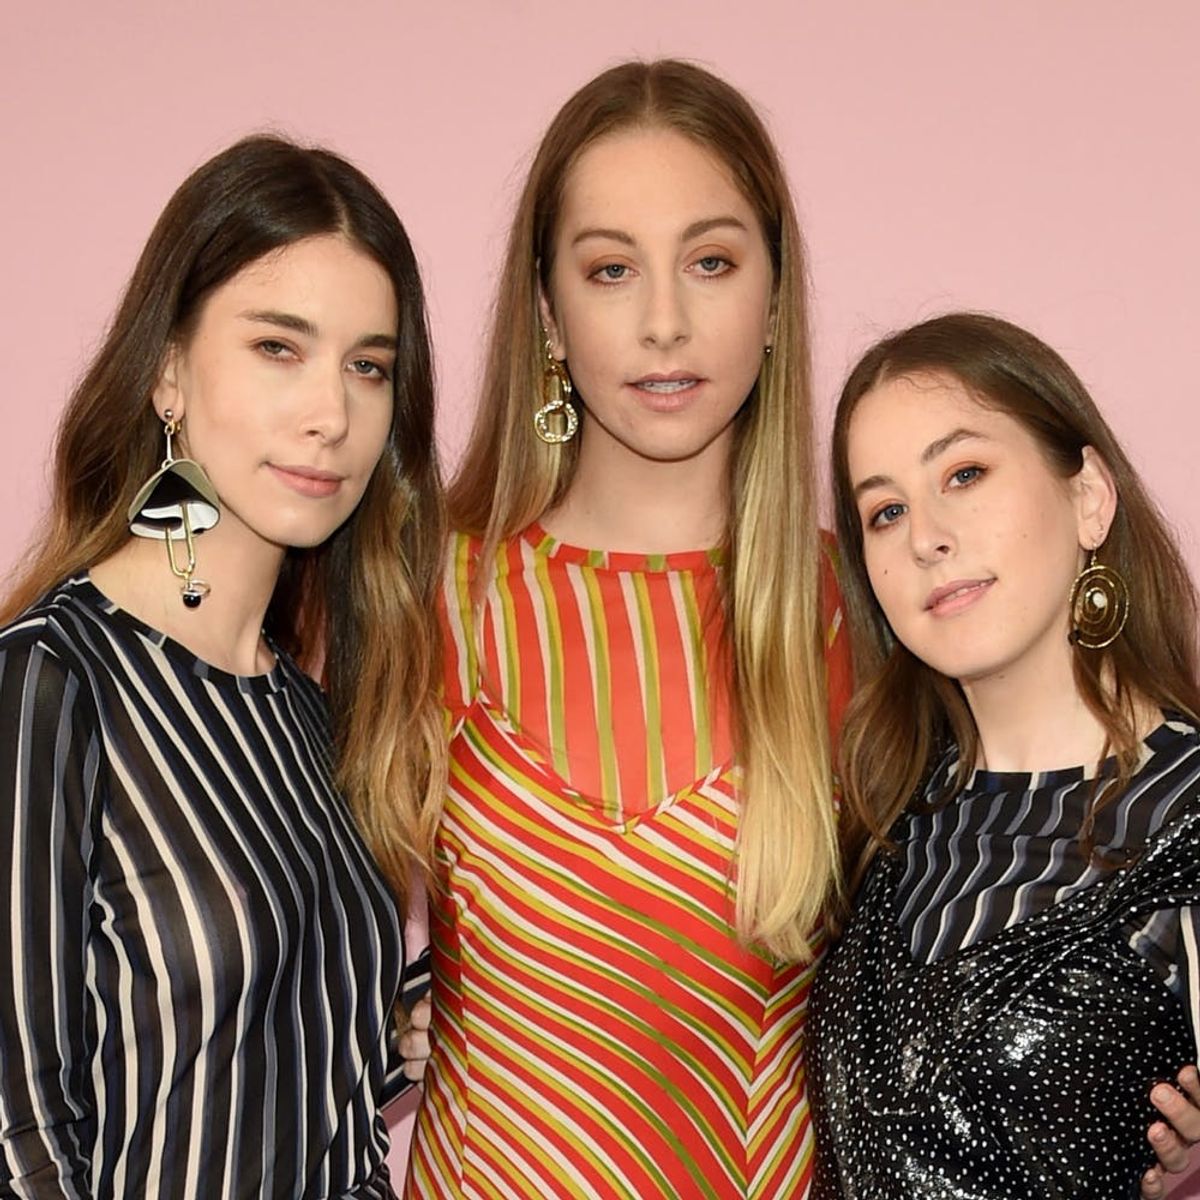 Watch Haim’s Unexpected Cover of Shania Twain’s “That Don’t Impress Me Much”